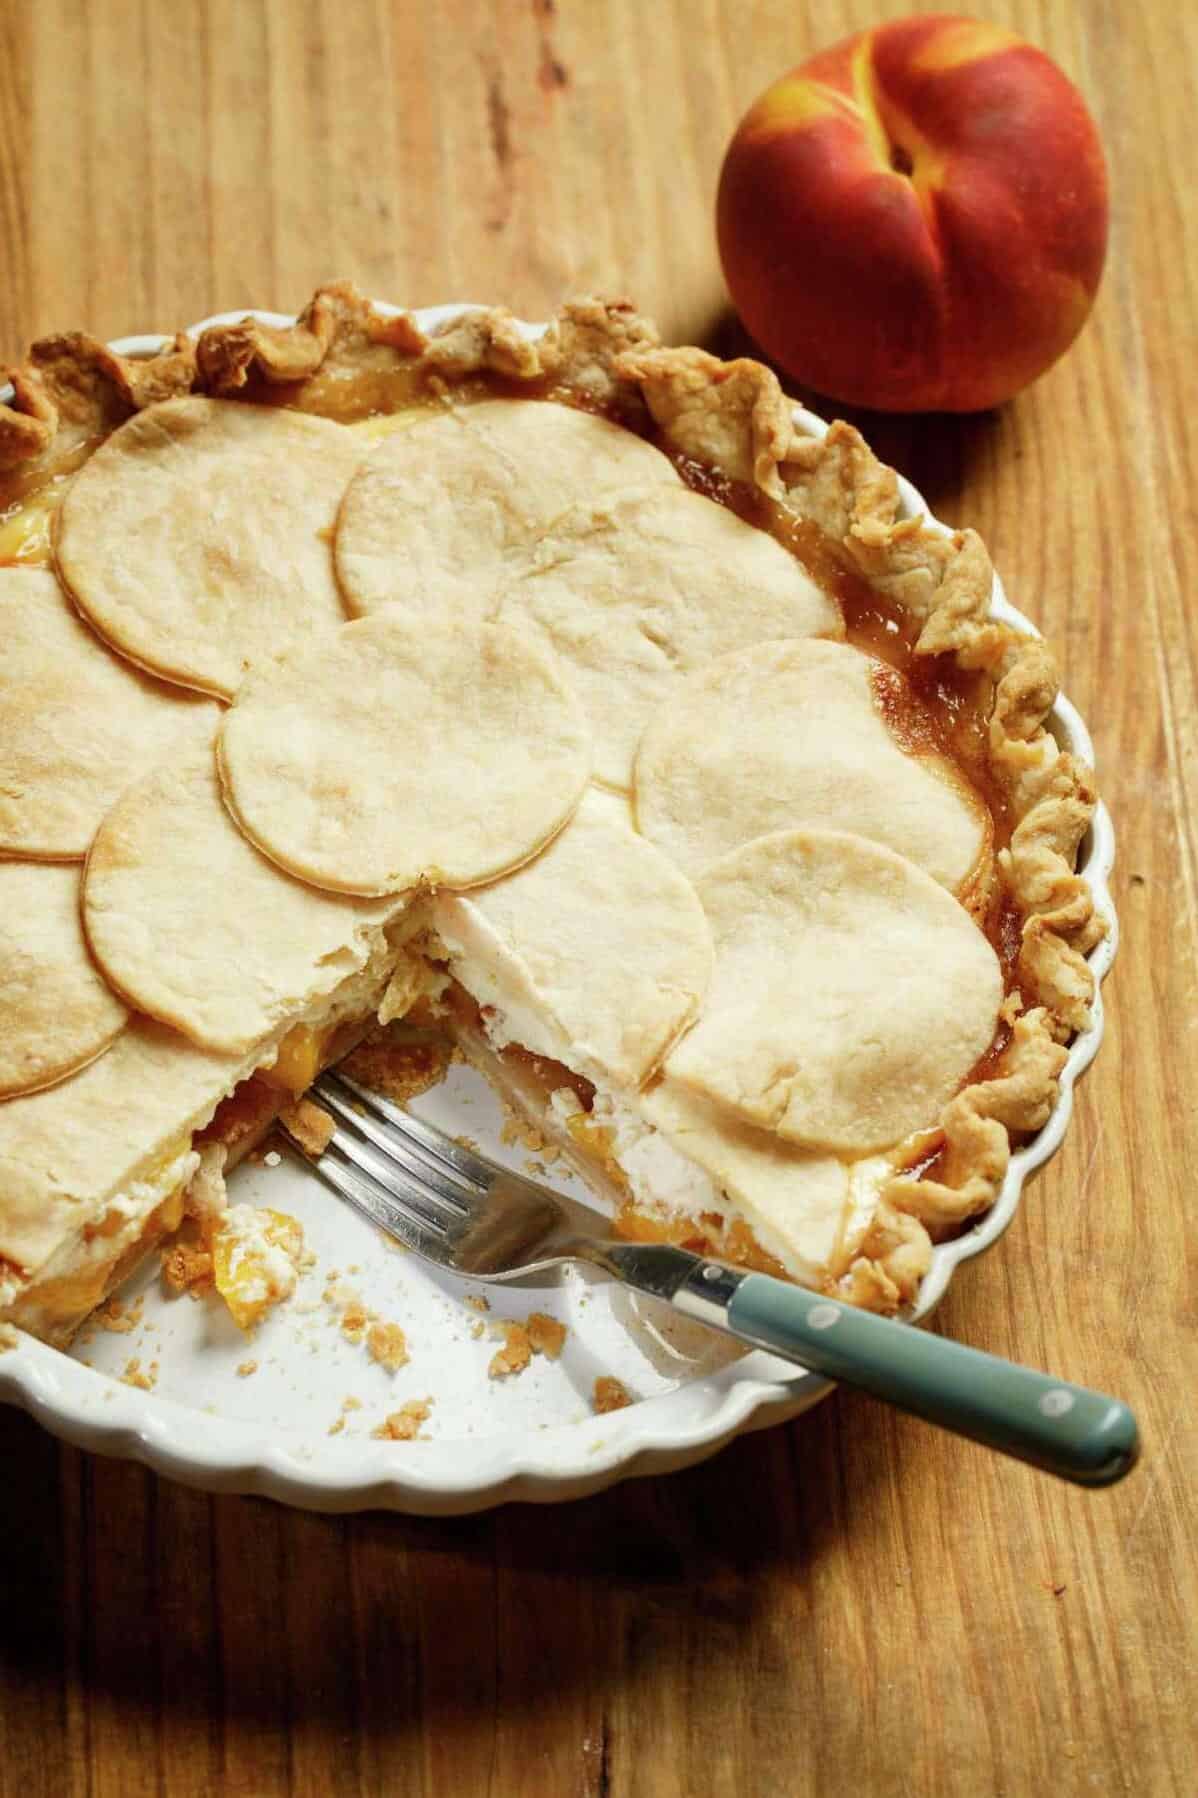  One bite of this Peacheesy Pie and you'll never want to go back to regular peach pie again.